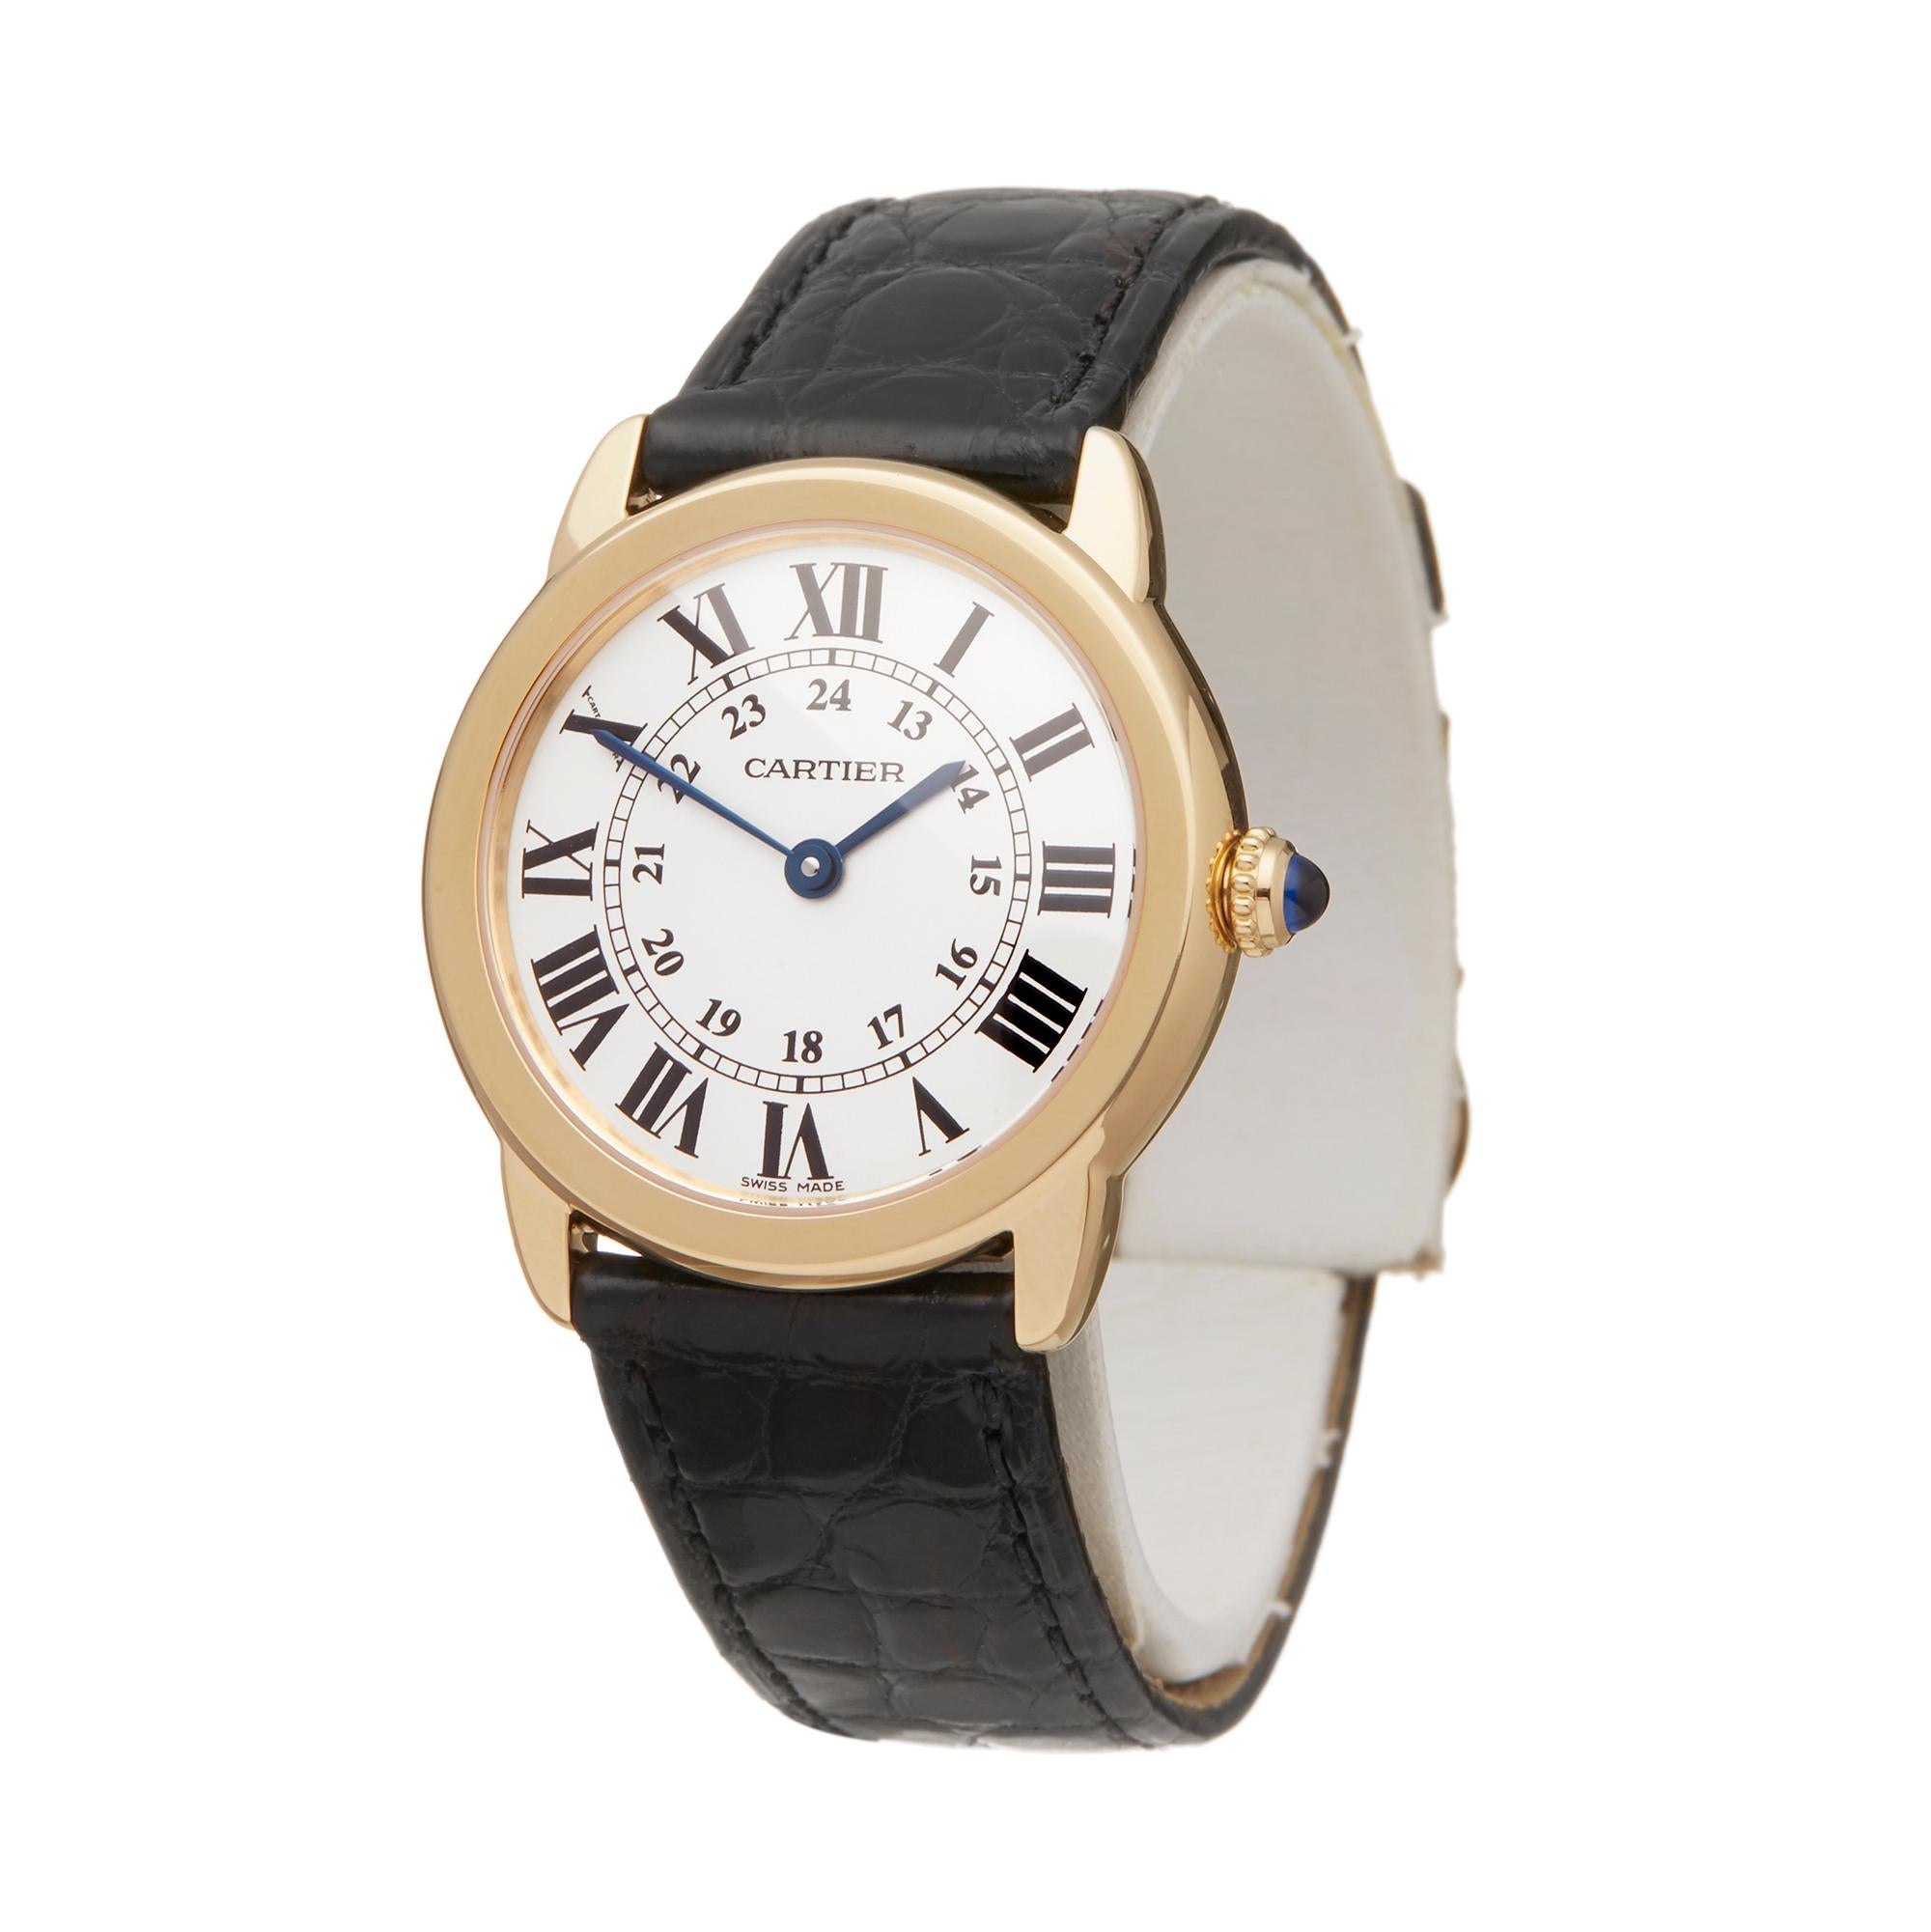 Reference: W5980
Manufacturer: Cartier
Model: Ronde Solo
Model Number: W6700355 or 2987
Date: 9th December 2015
Gender: Women's
Box and Papers: Box, Manuals and Guarantee
Dial: Silver Roman
Glass: Sapphire Crystal
Movement: Quartz
Water Resistance: